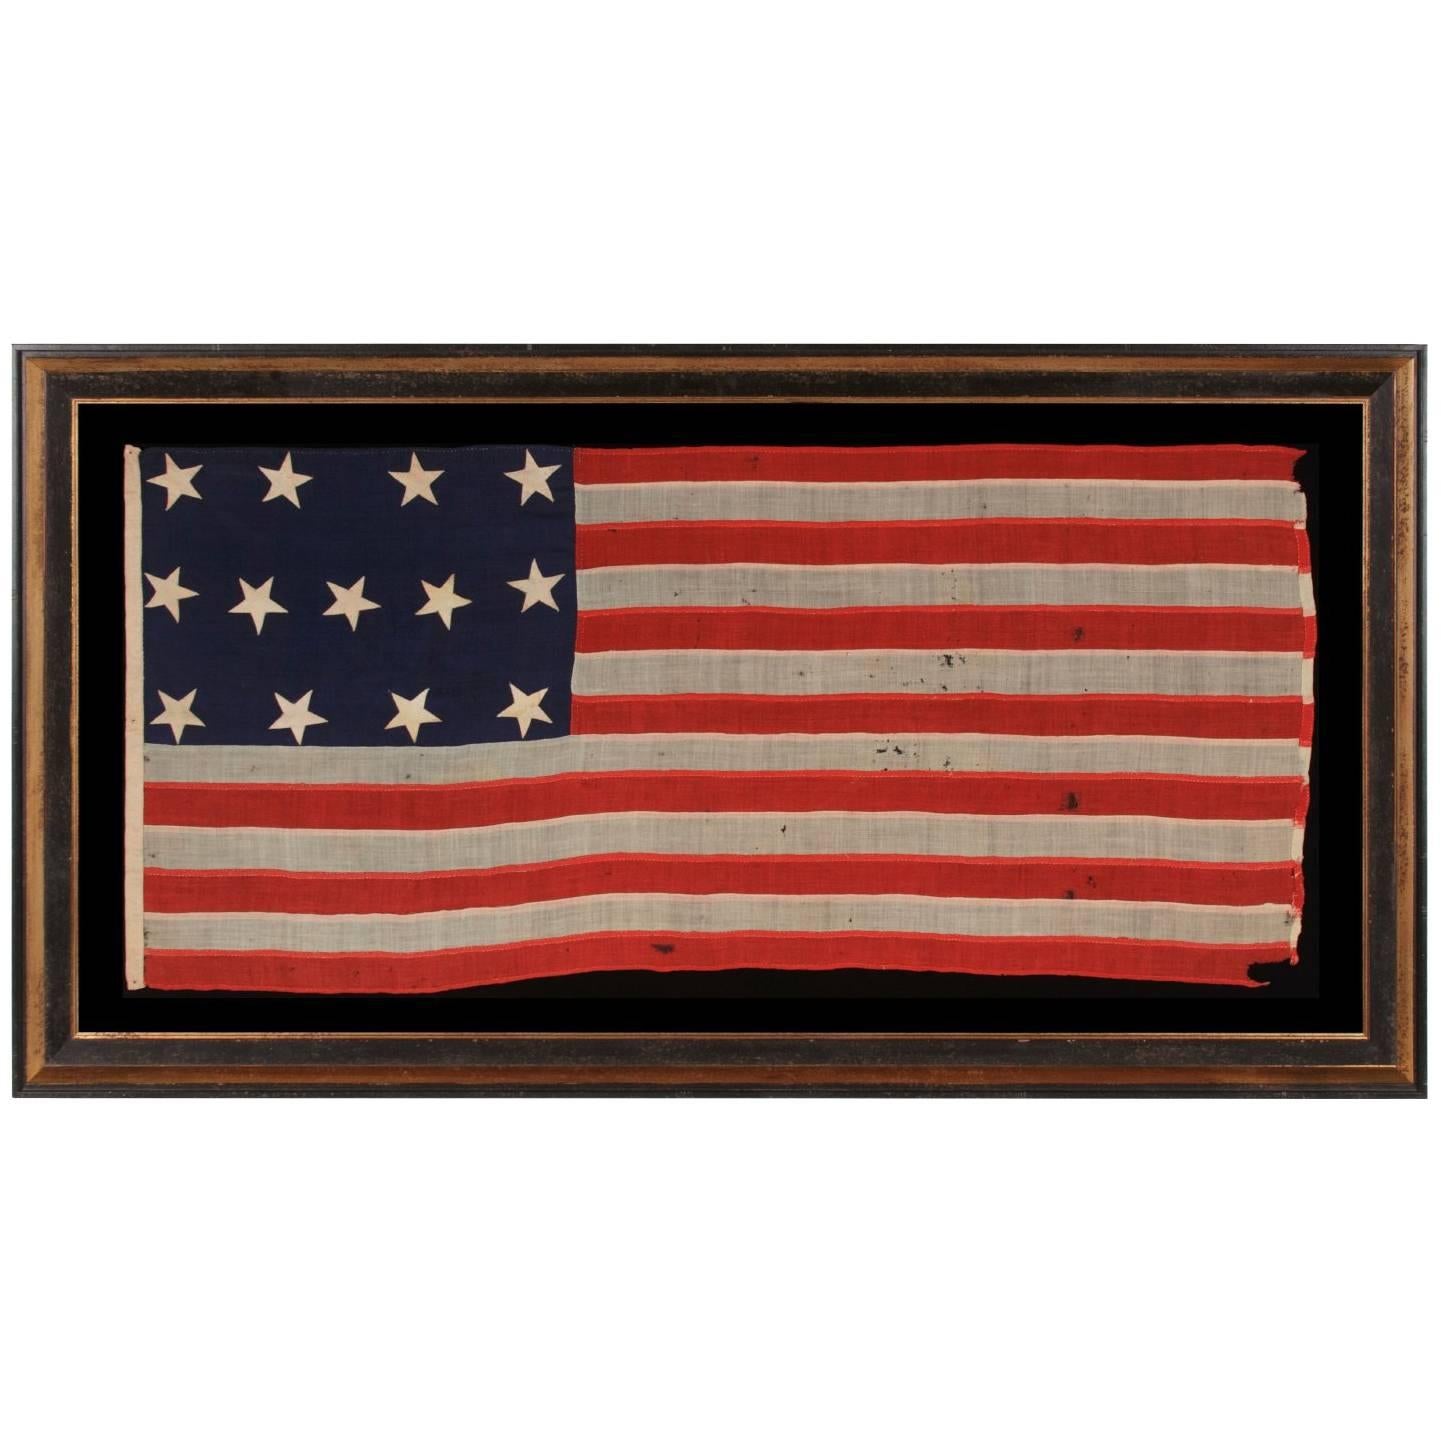 13 Entirely Hand-Sewn Stars, U.S. Navy Small Boat Ensign of the Civil War Period